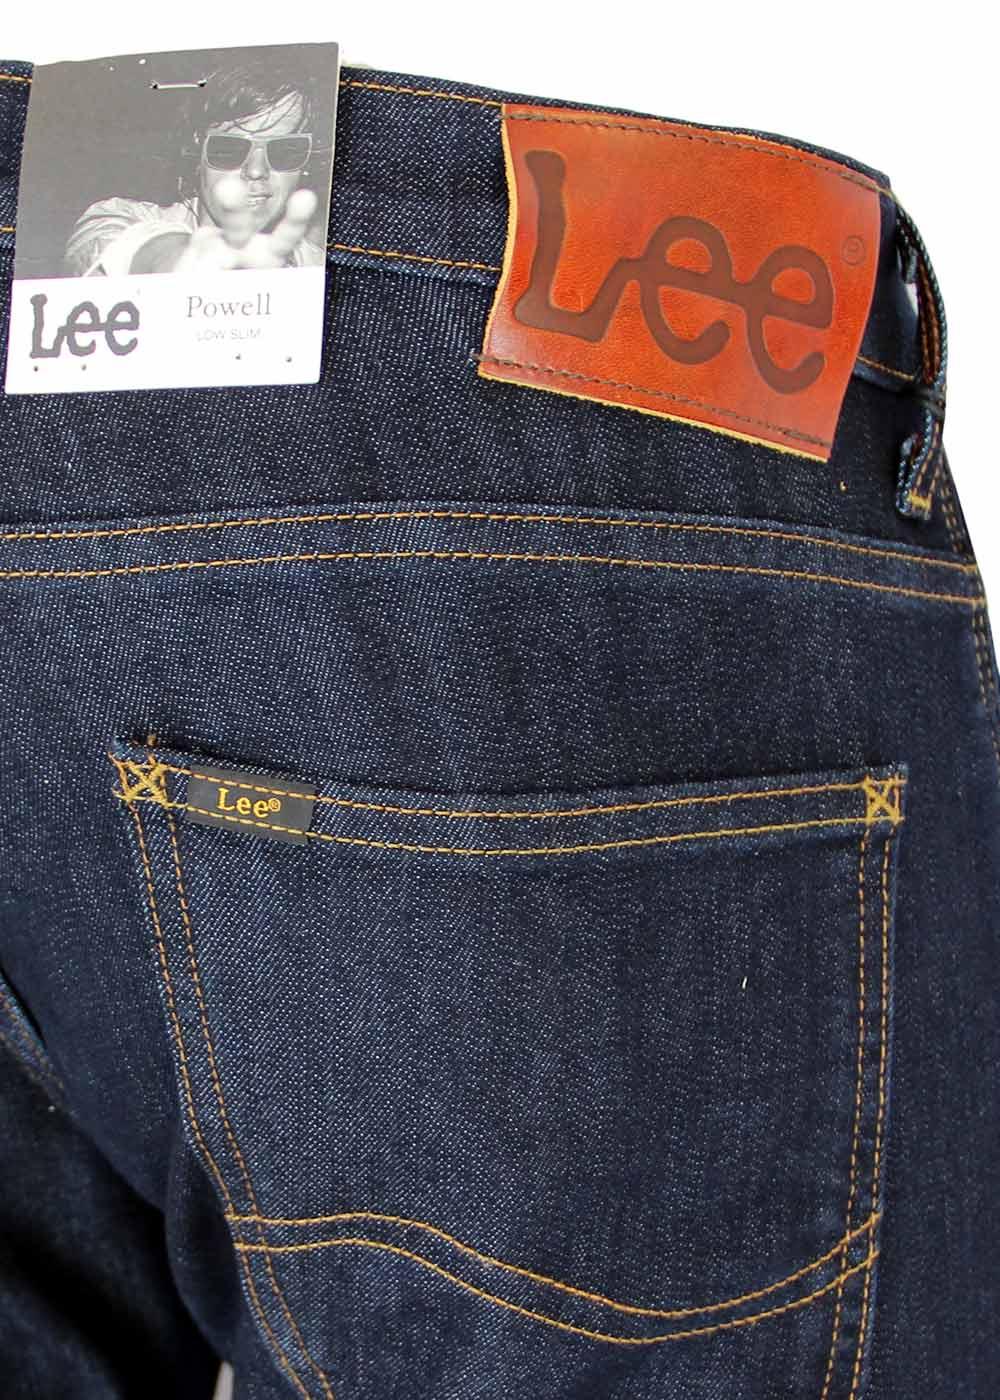 LEE JEANS Powell Retro Mod Low Slim Fit Jeans in Rinse